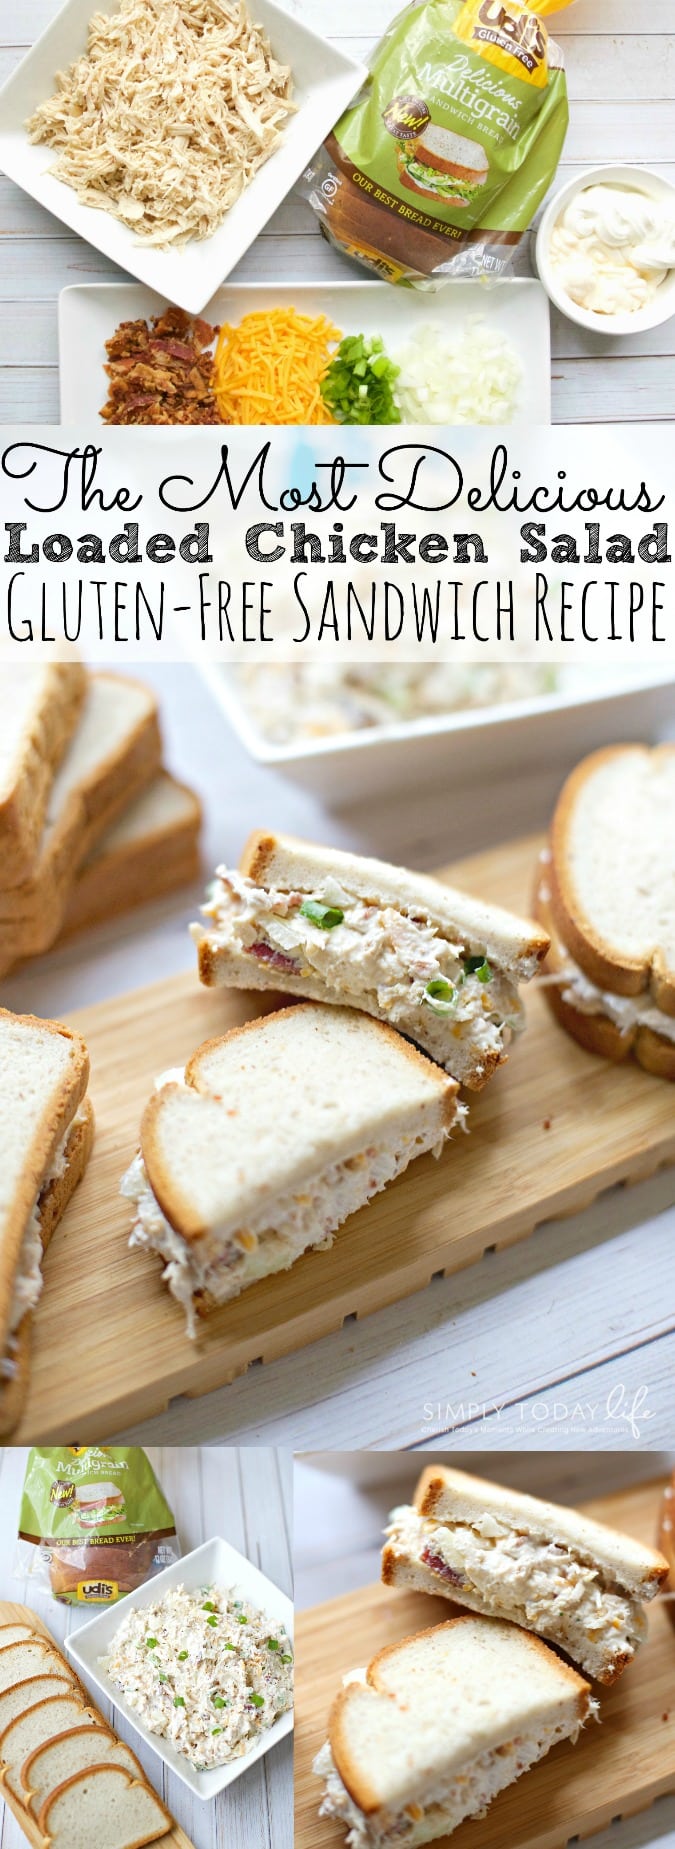 The Most Delicious Loaded Chicken Salad Sandwich Gluten-Free - simplytodaylife.com